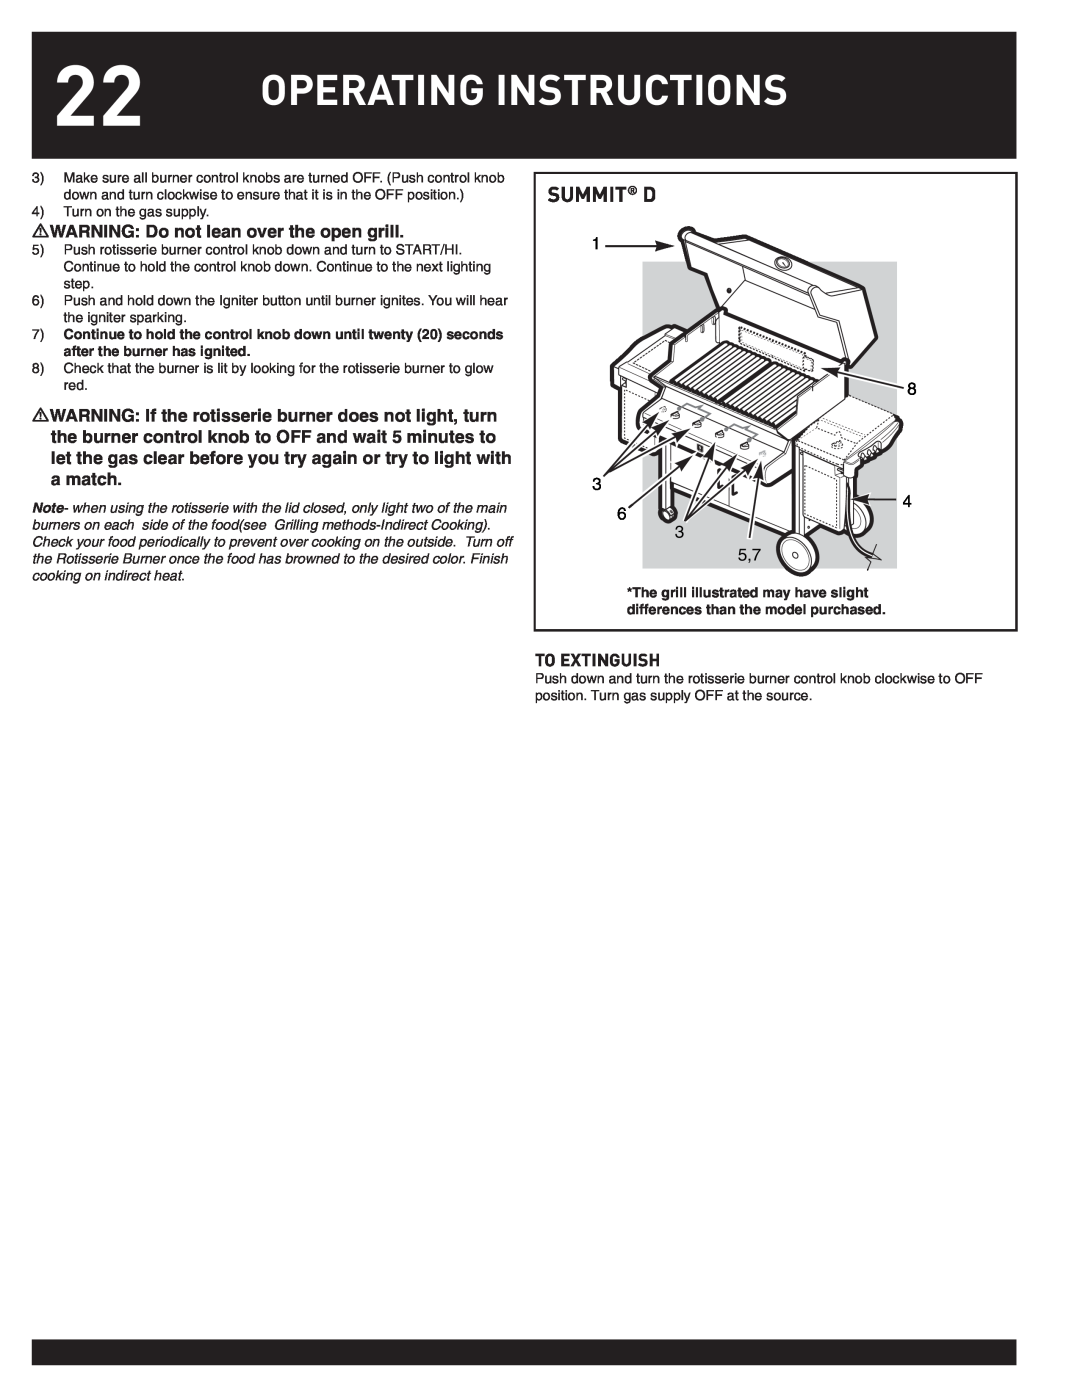 Weber 38044 manual Operating Instructions, Summit D, WARNING Do not lean over the open grill, To Extinguish 